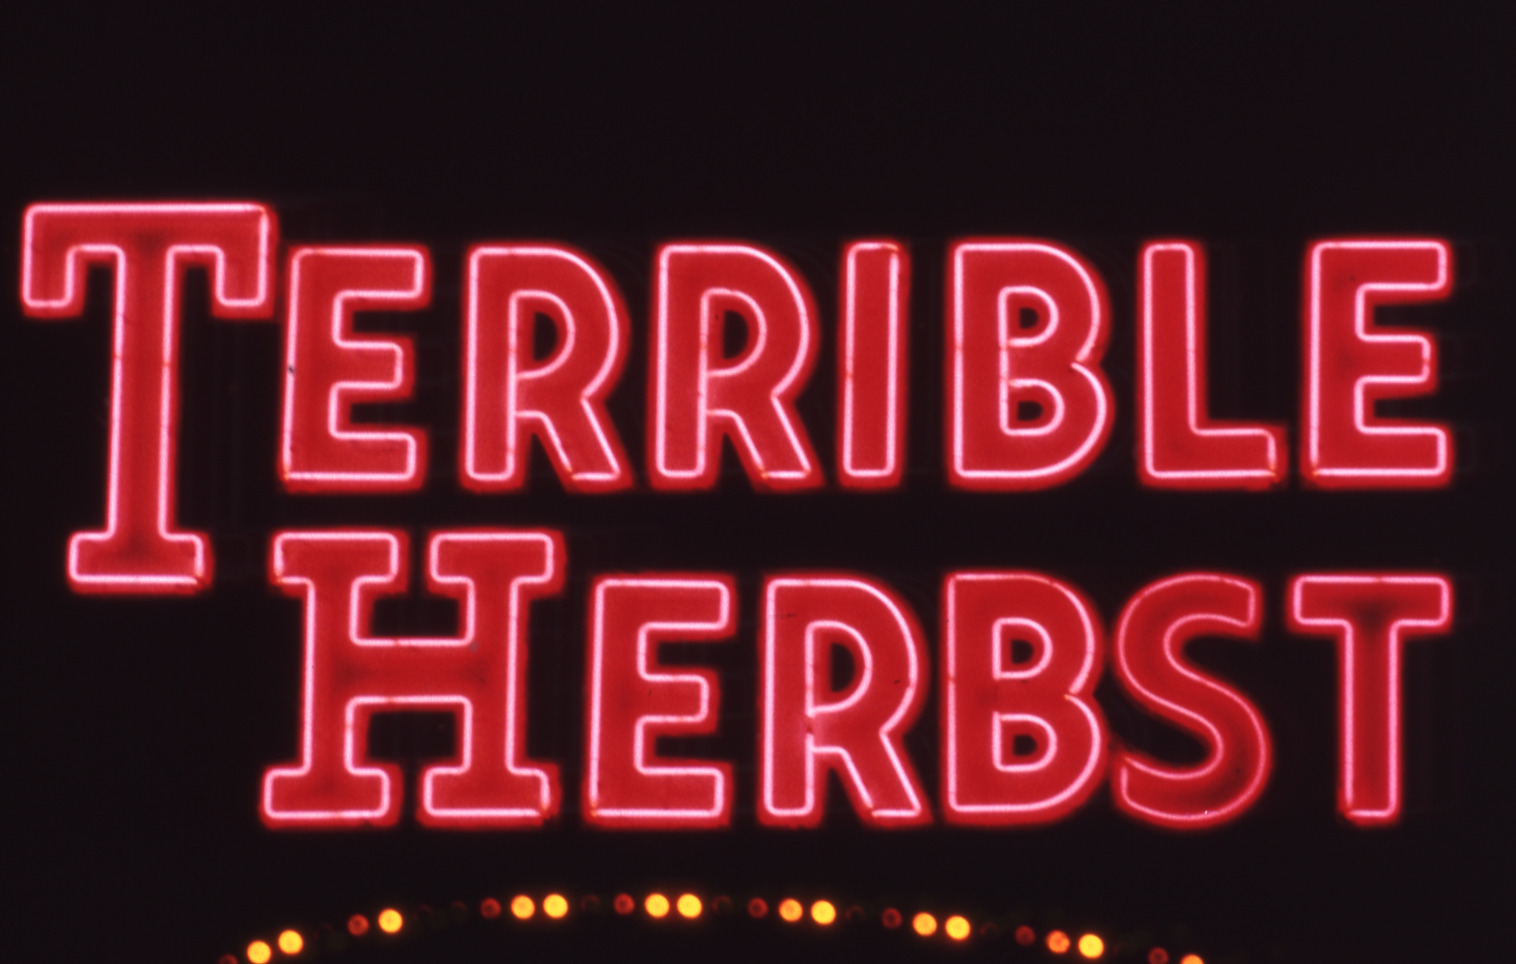 Terrible Herbst gas station lettering sign, Las Vegas, Nevada: photographic print